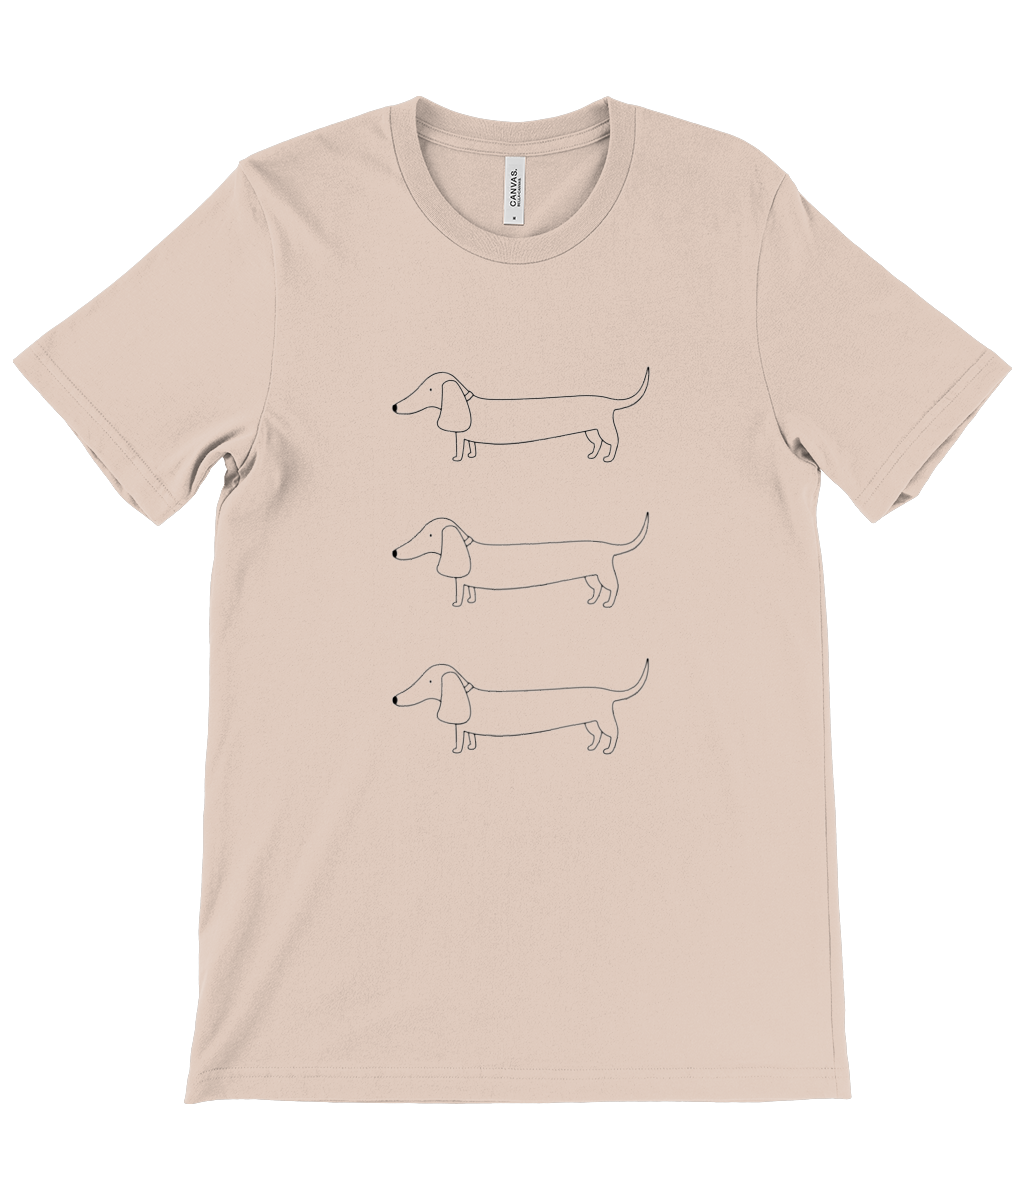 Peach unisex t-shirt. Design on front shows 3 outline drawings of sausage dogs, in a column one above the other.